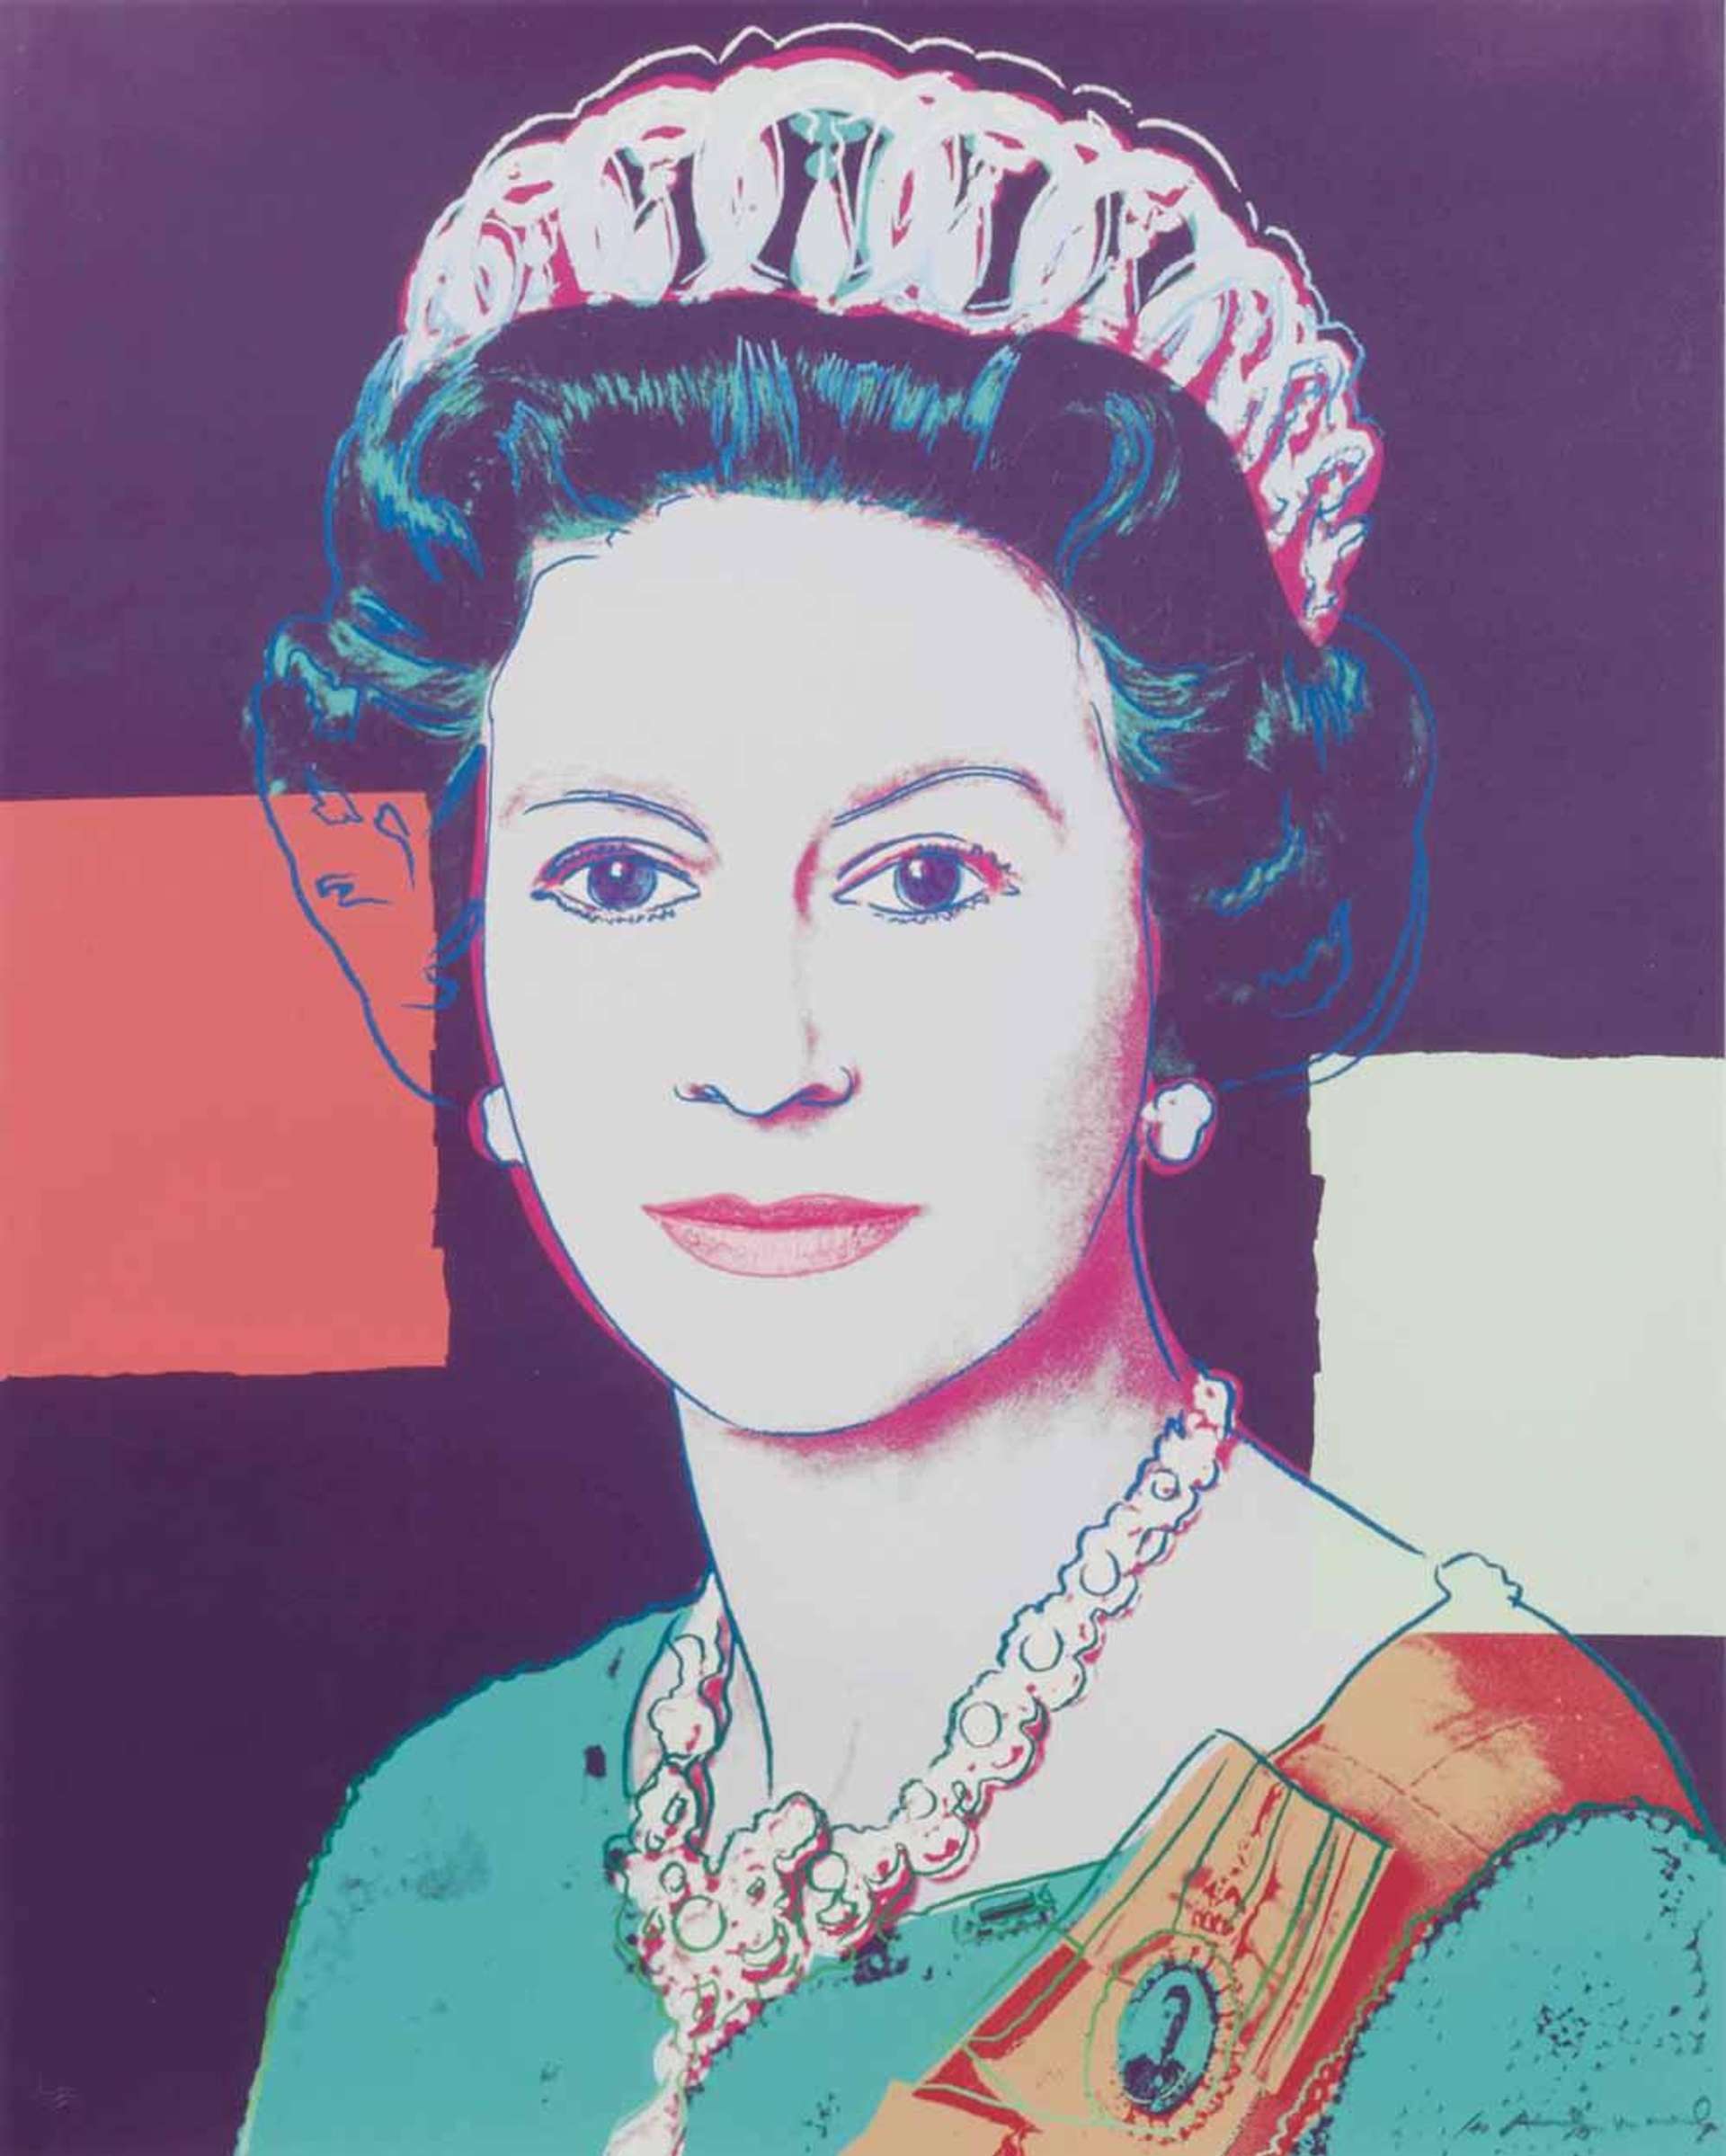 Queen Elizabeth II of the United Kingdom outfitted in royal regalia for her official portrait. Set against an aubergine purple background, with collaged blocks in orange and white reaching towards the Queen's portrait.